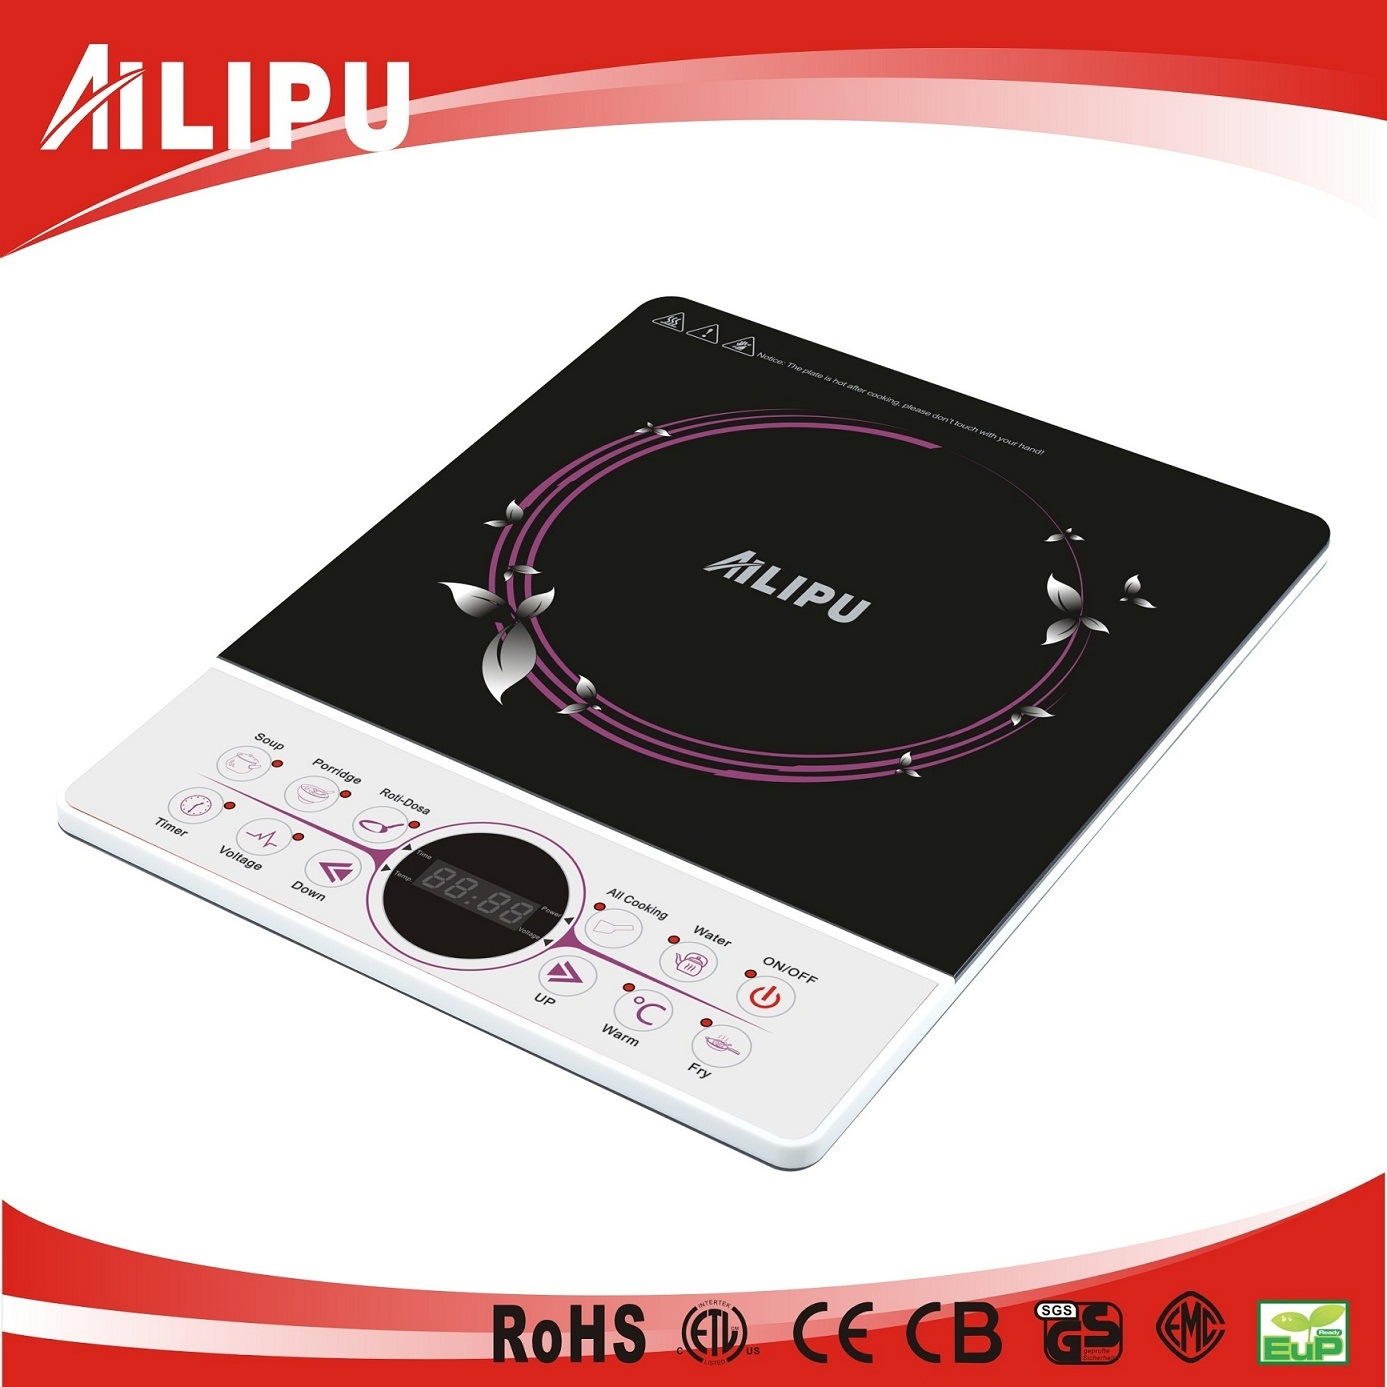 2015 Home Appliance, Kitchenware, Induction Heater, Stove, Slim Body (SM-A1)